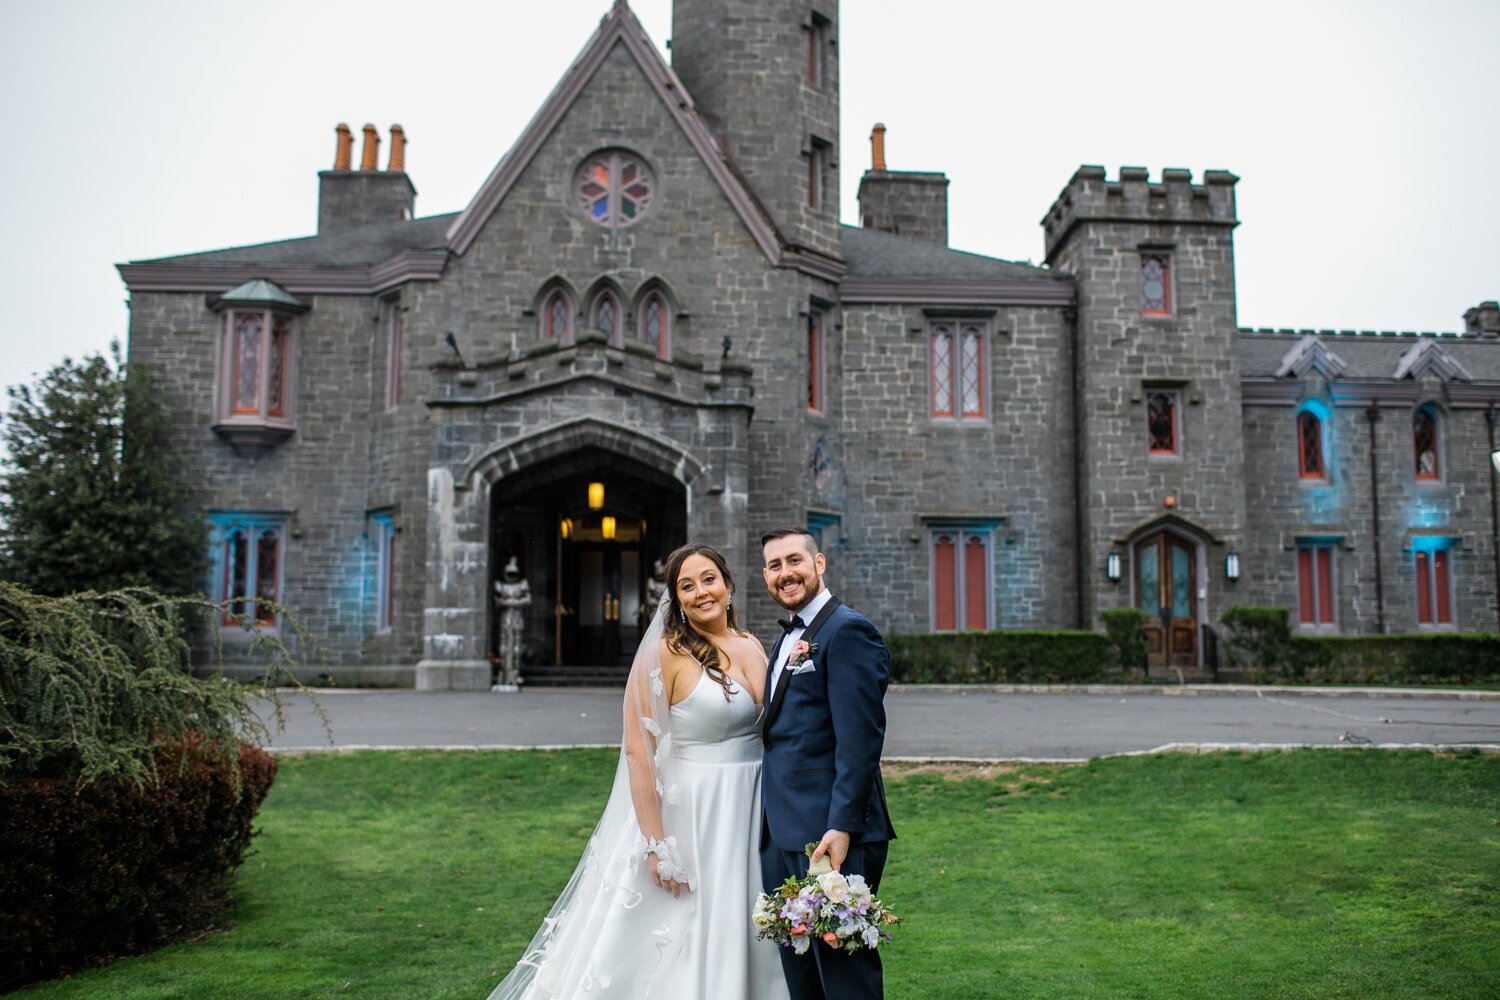 54_Bride and groom portraits at Whitby Castle in Rye, NY.jpg